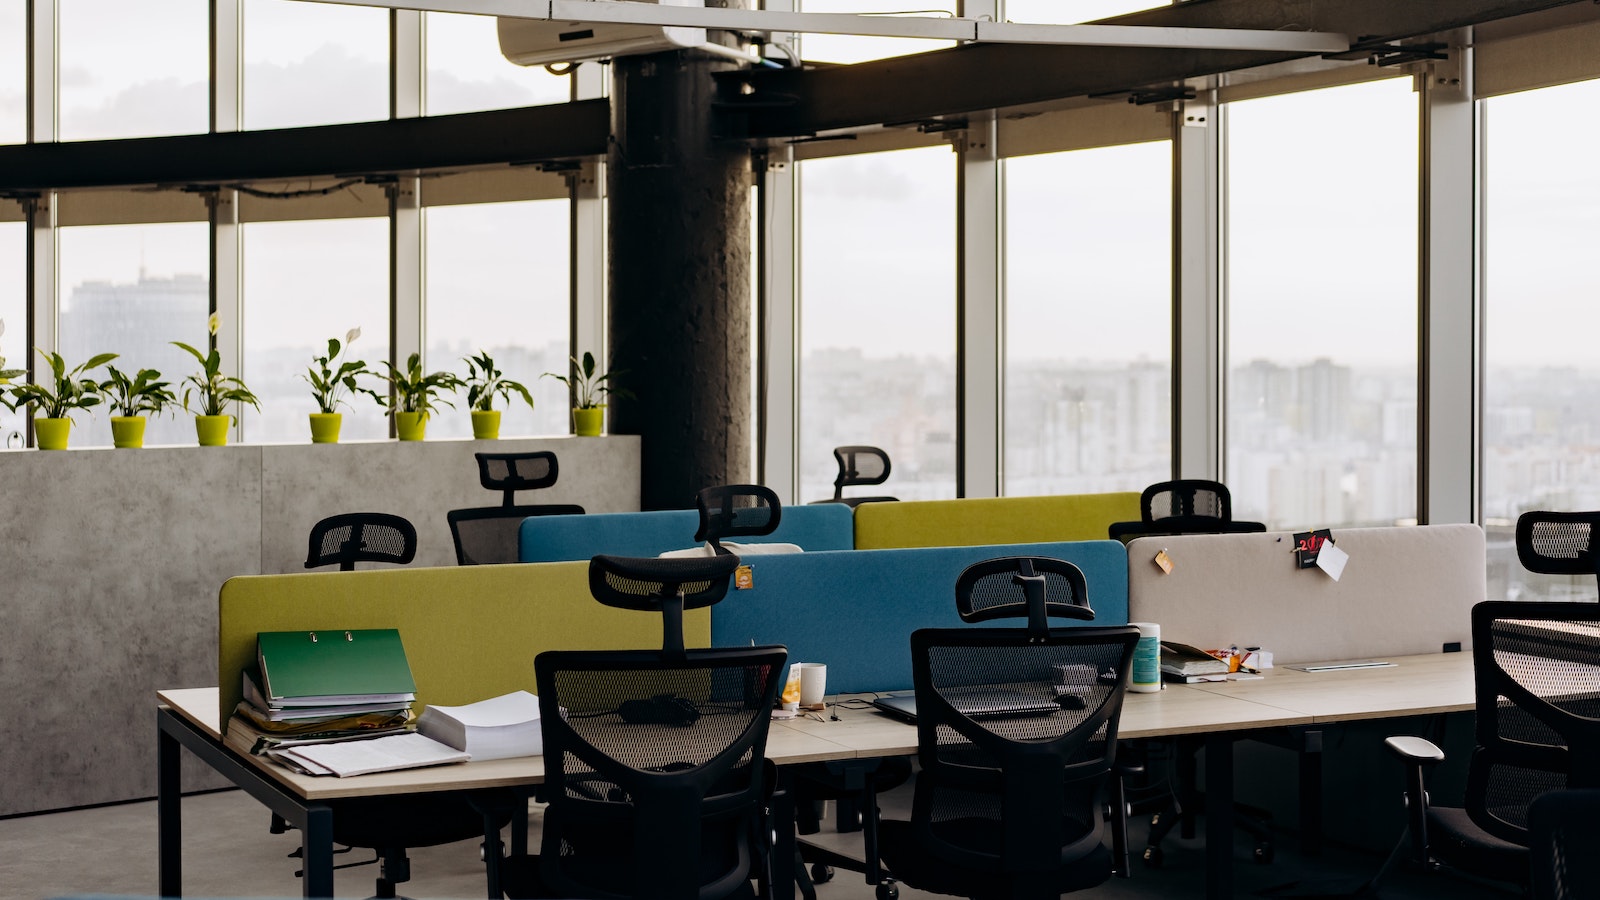 Desks with colorful dividers in a work space